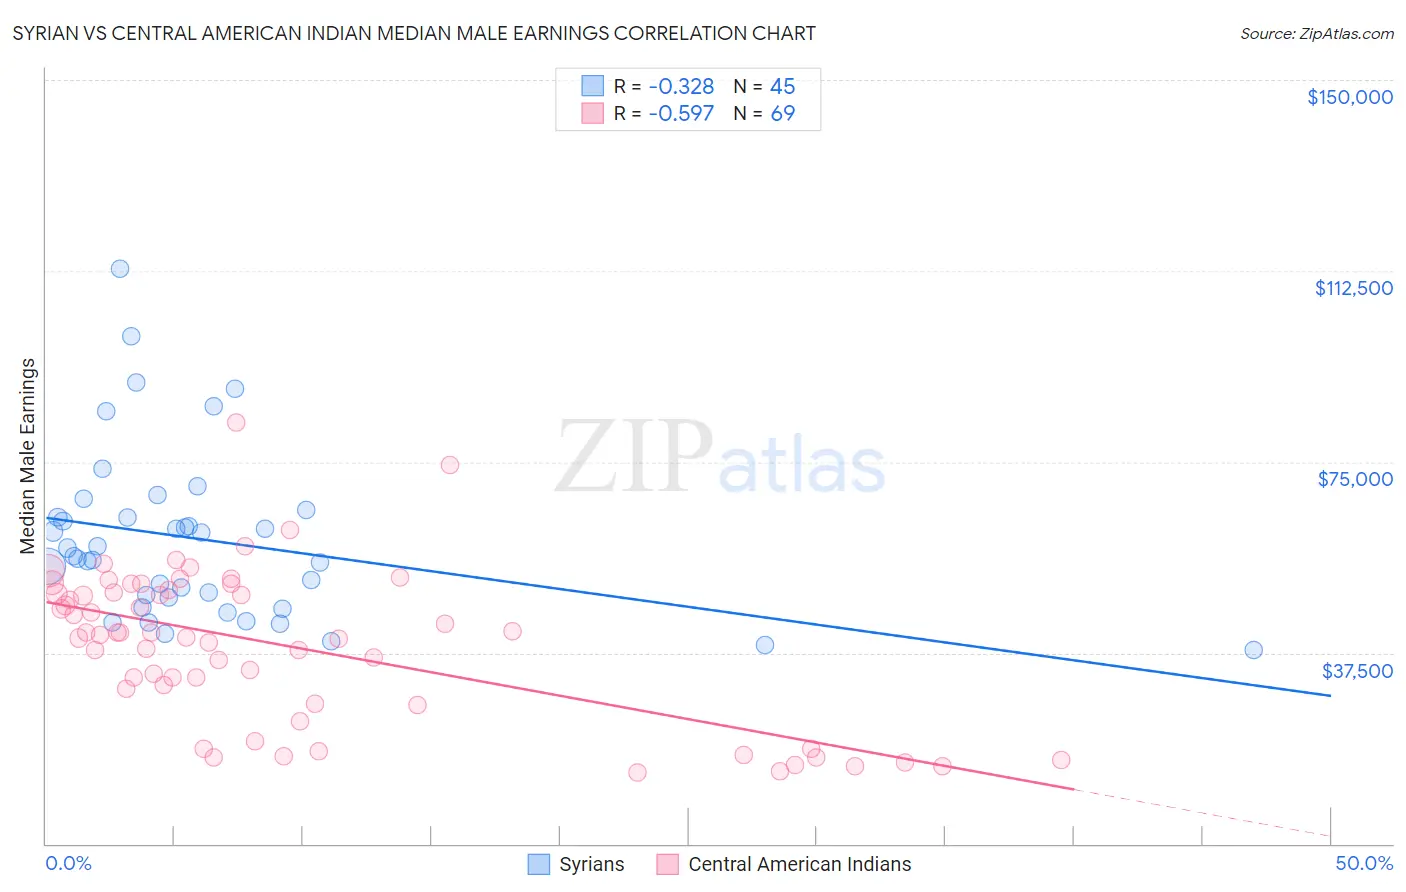 Syrian vs Central American Indian Median Male Earnings